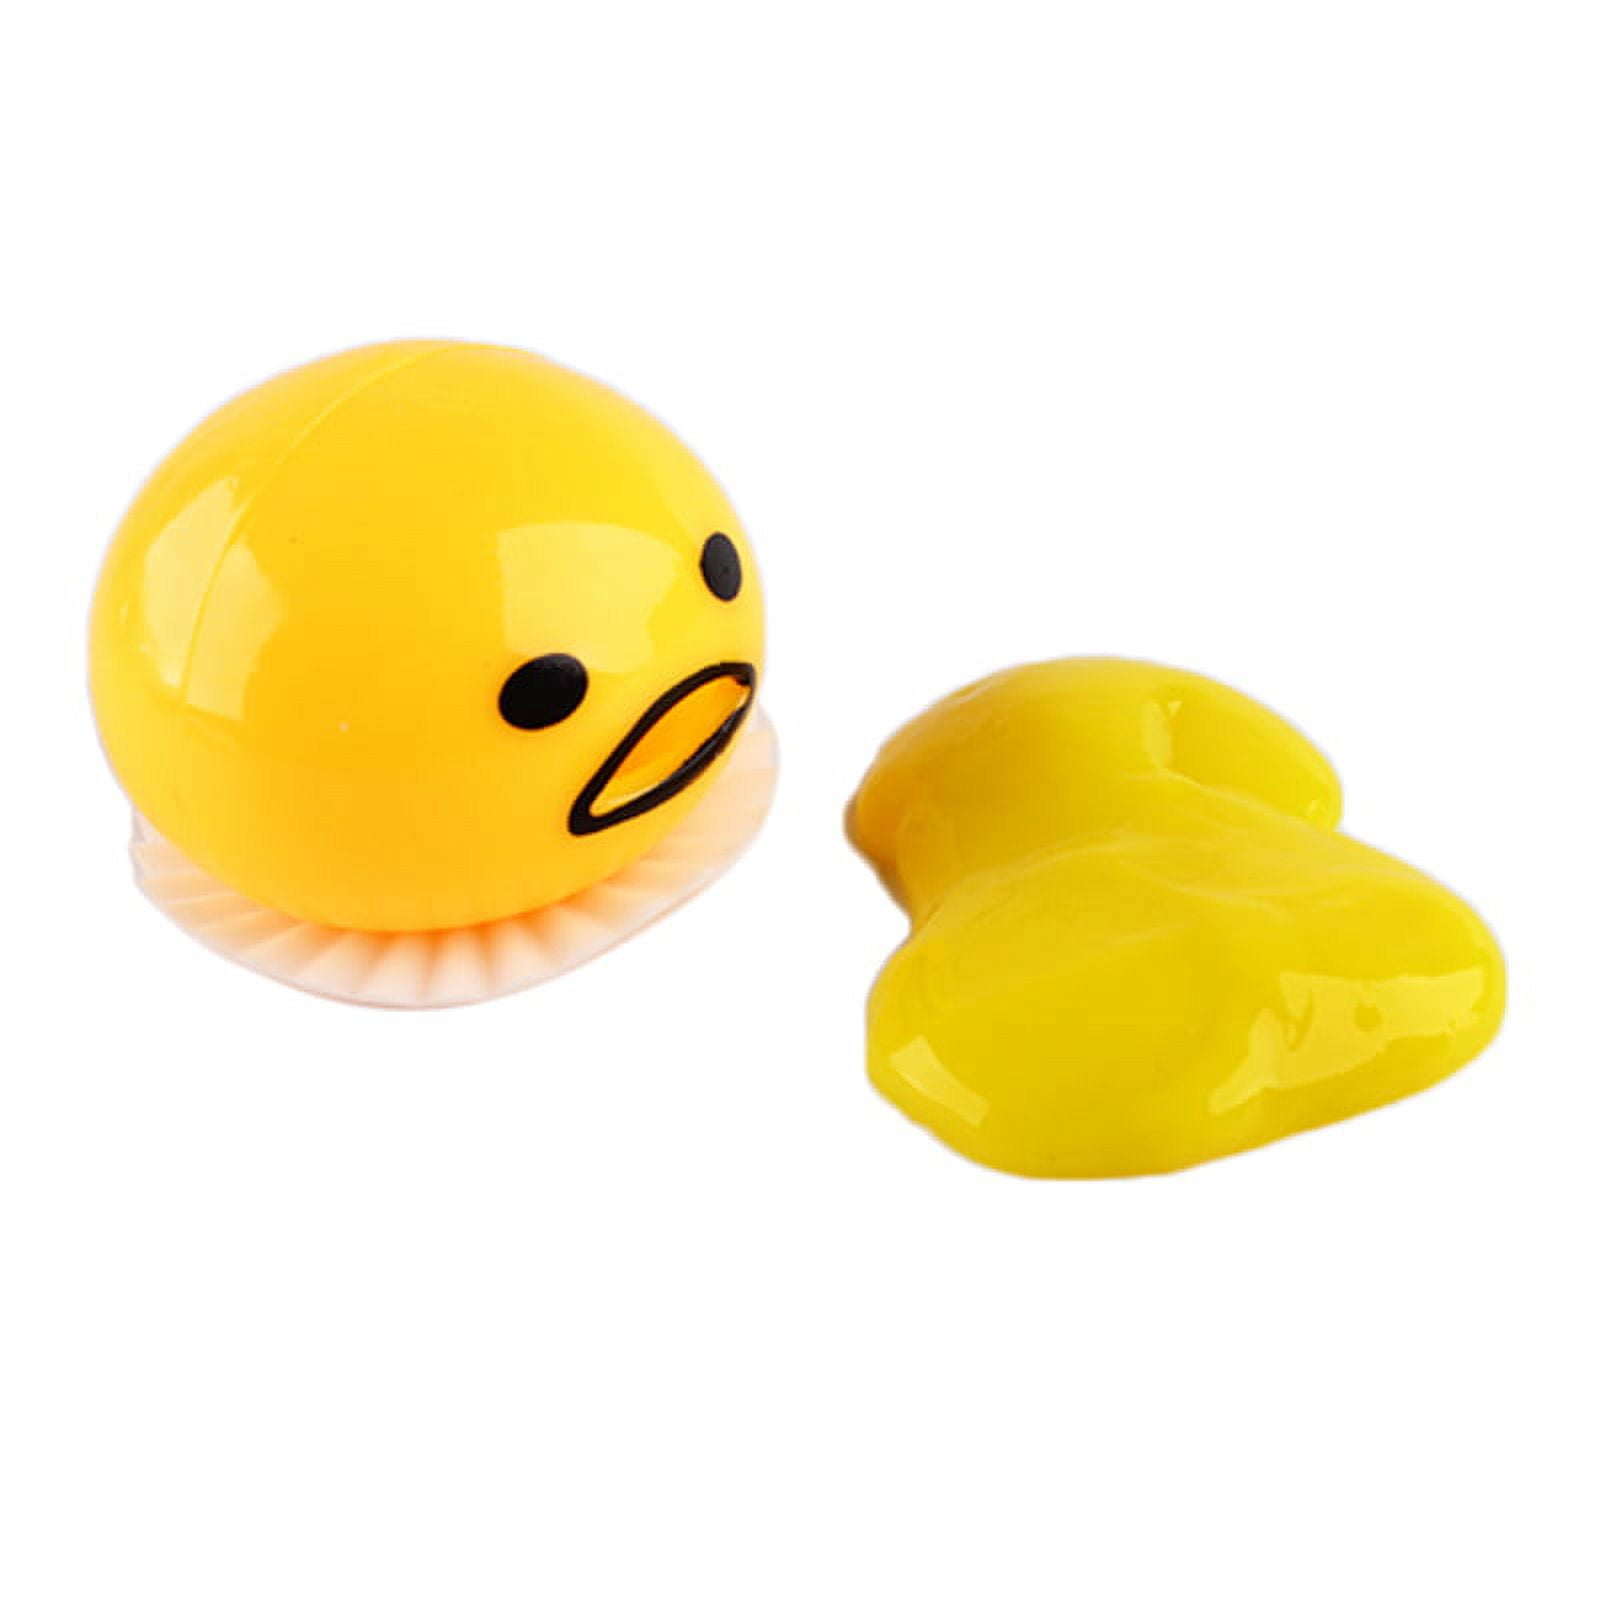 JA-RU Puking Toy Ball (4 Squishy Ball Assorted) Puking Egg Yolk Slime  Squishy Toys. Cute Stress Balls. Funny Fake Vomit Prank Toys. Bulk Party  Favors